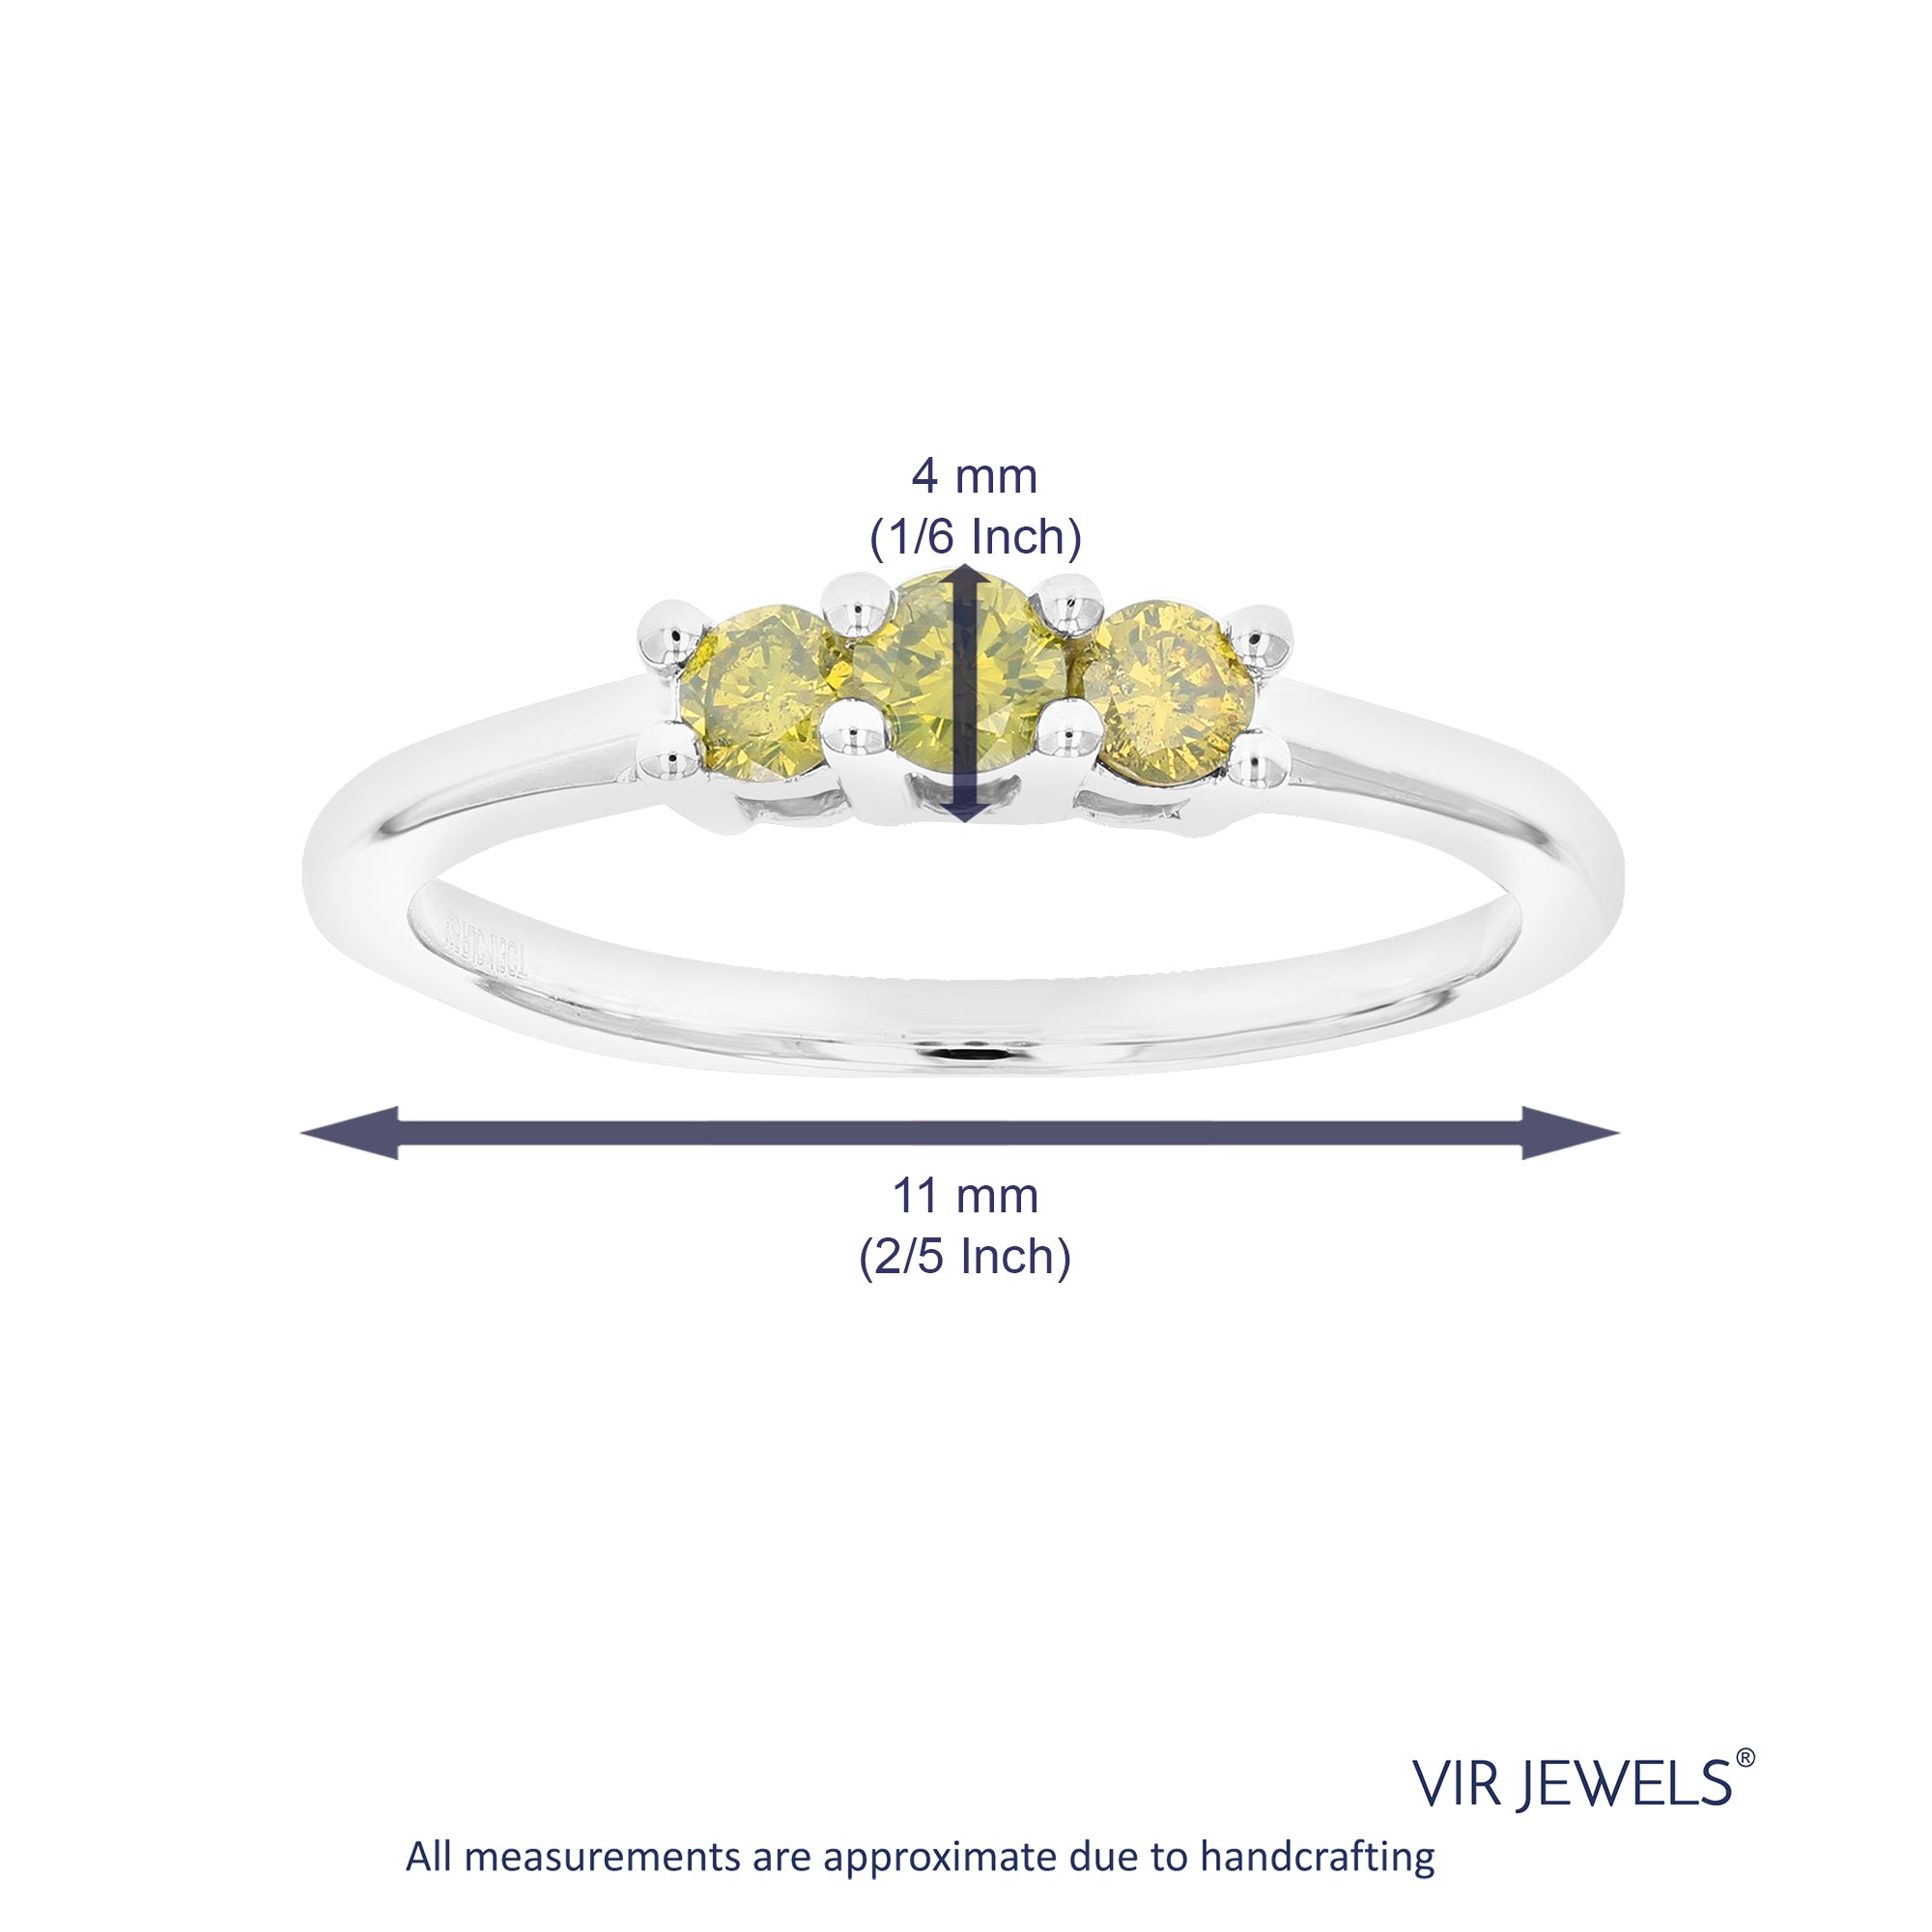 3/8 cttw 3 Stone Round Cut Yellow Diamond Engagement Ring .925 Sterling Silver Prong Set